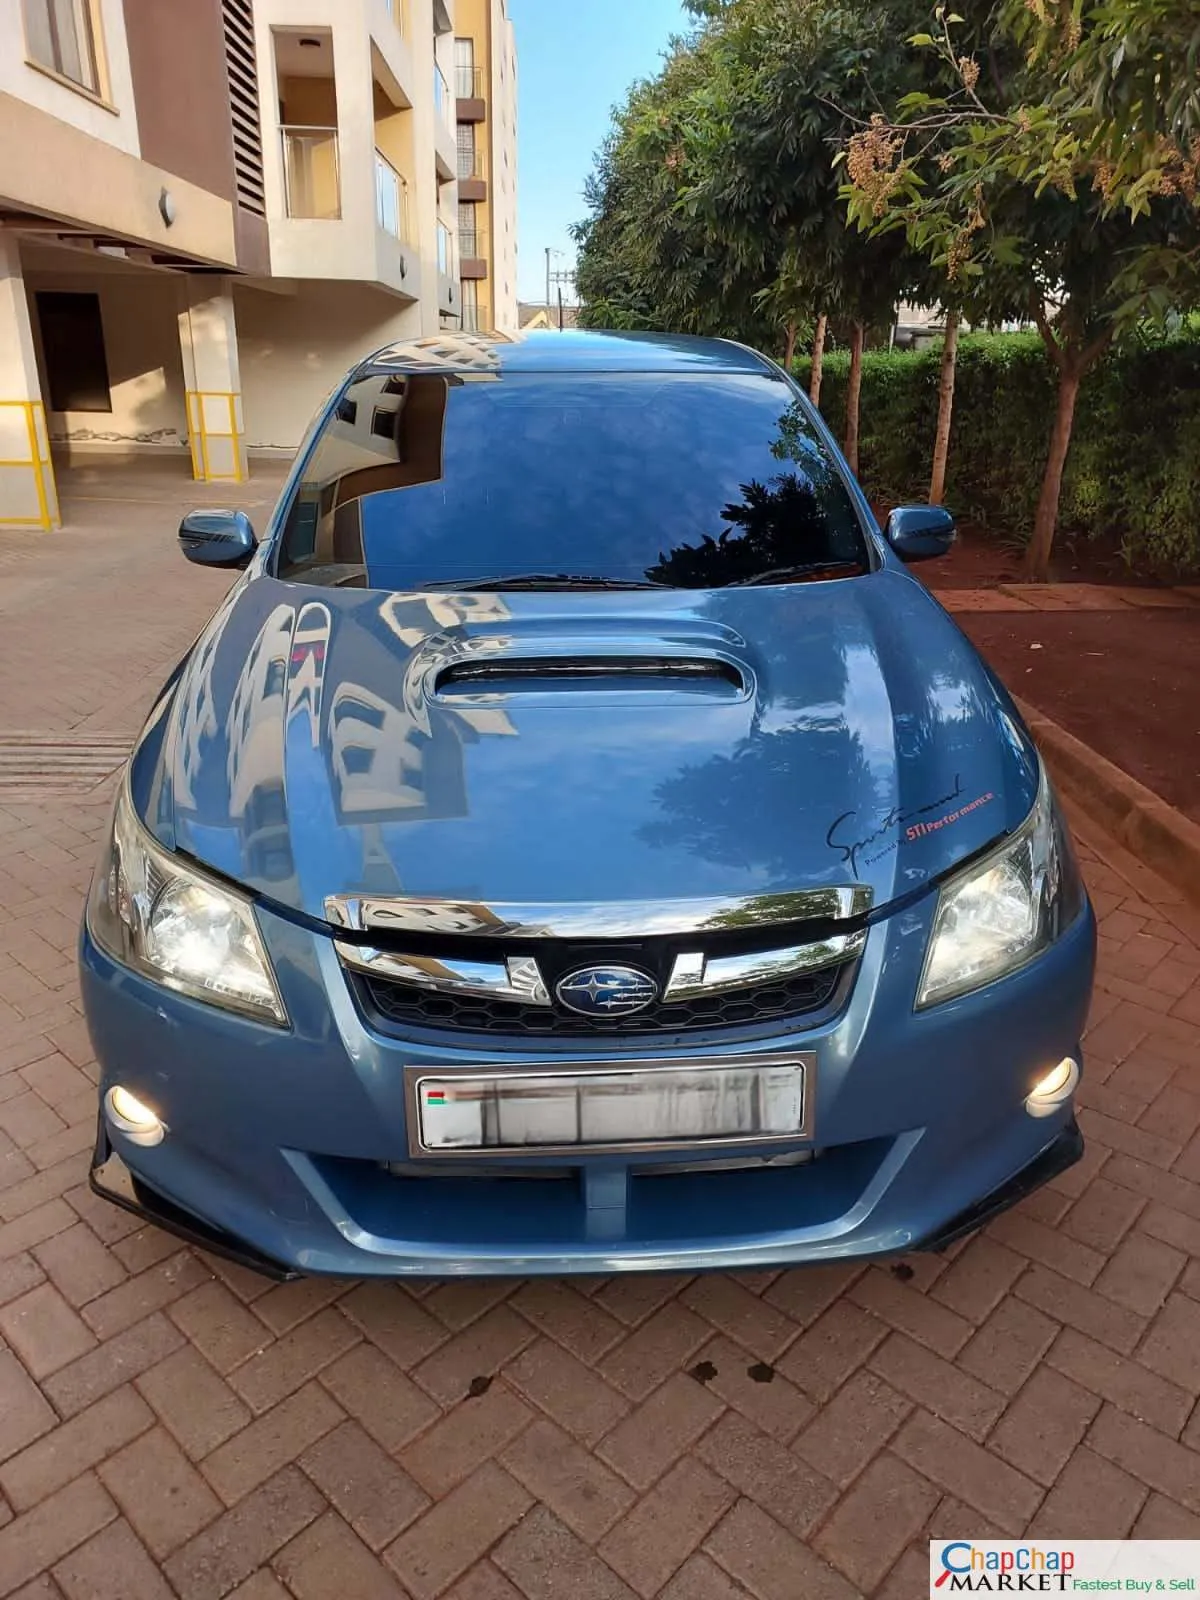 Subaru EXIGA 🔥 Asian owner for sale in kenya 🔥 You Pay 30% deposit Trade in Ok EXCLUSIVE hire purchase installments turbo